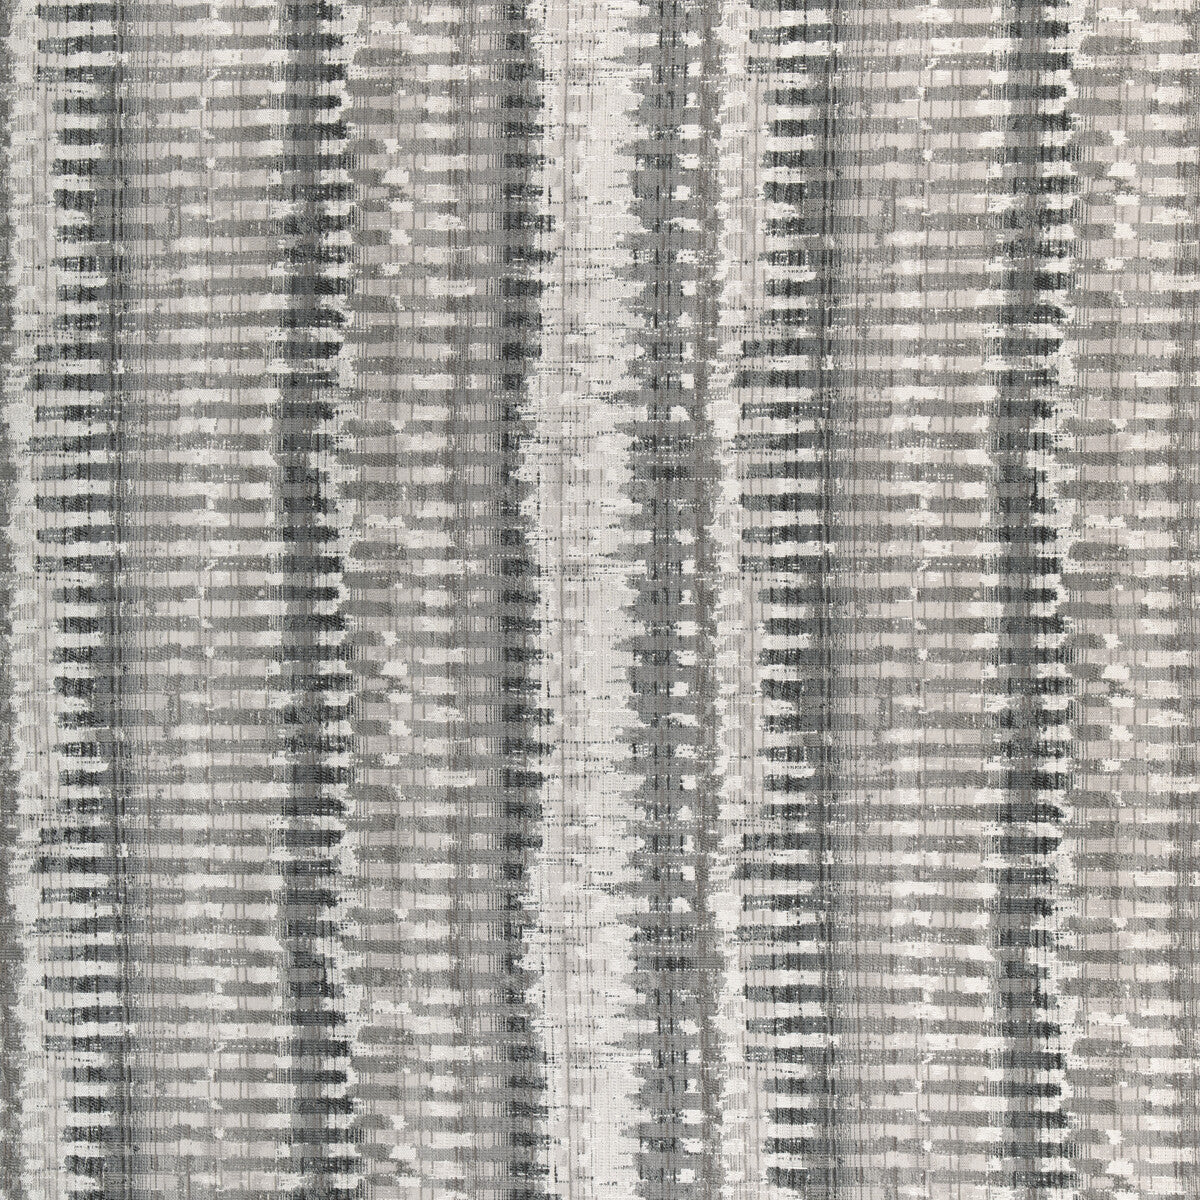 Kravet Design fabric in 37131-811 color - pattern 37131.811.0 - by Kravet Design in the Woven Colors collection